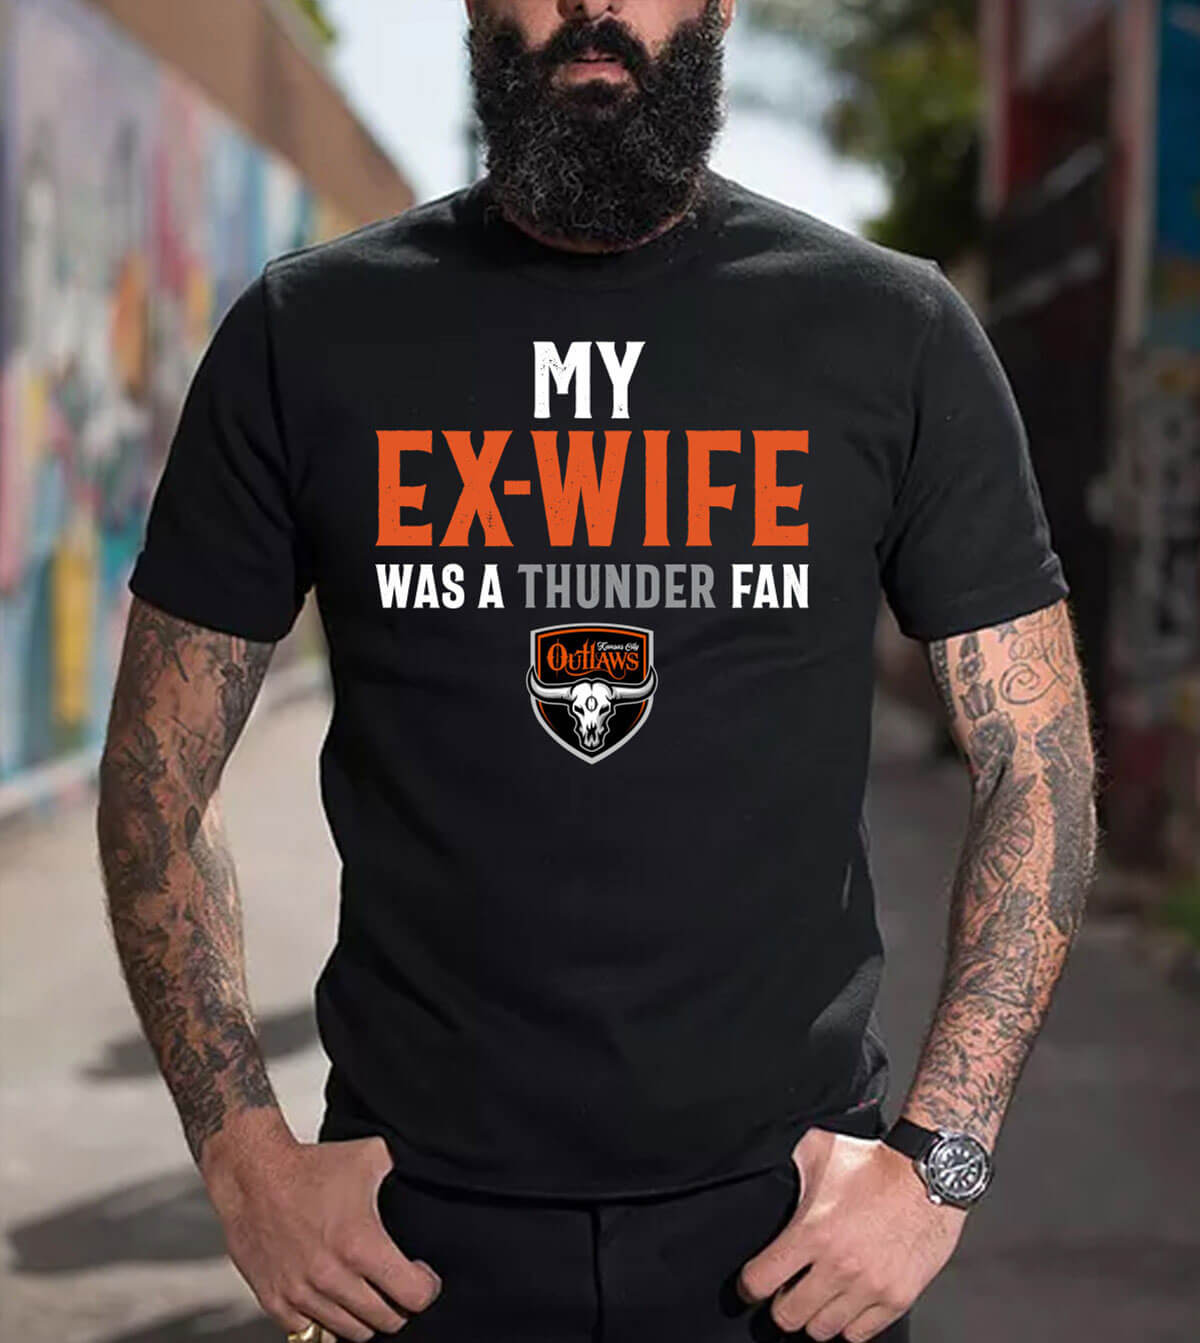 Front view of the black "My Ex-Wife was a Thunder Fan" t-shirt.